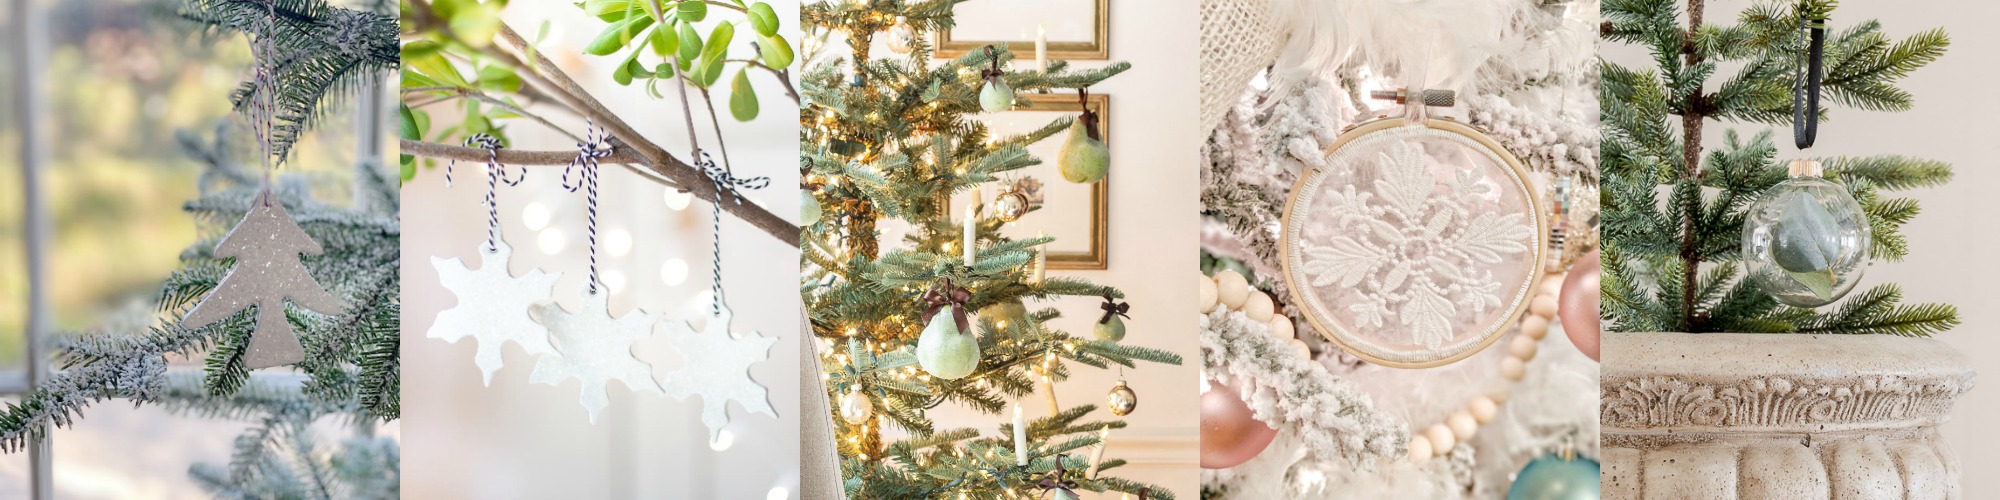 DIY Wood Bead Christmas Garland - So Much Better With Age